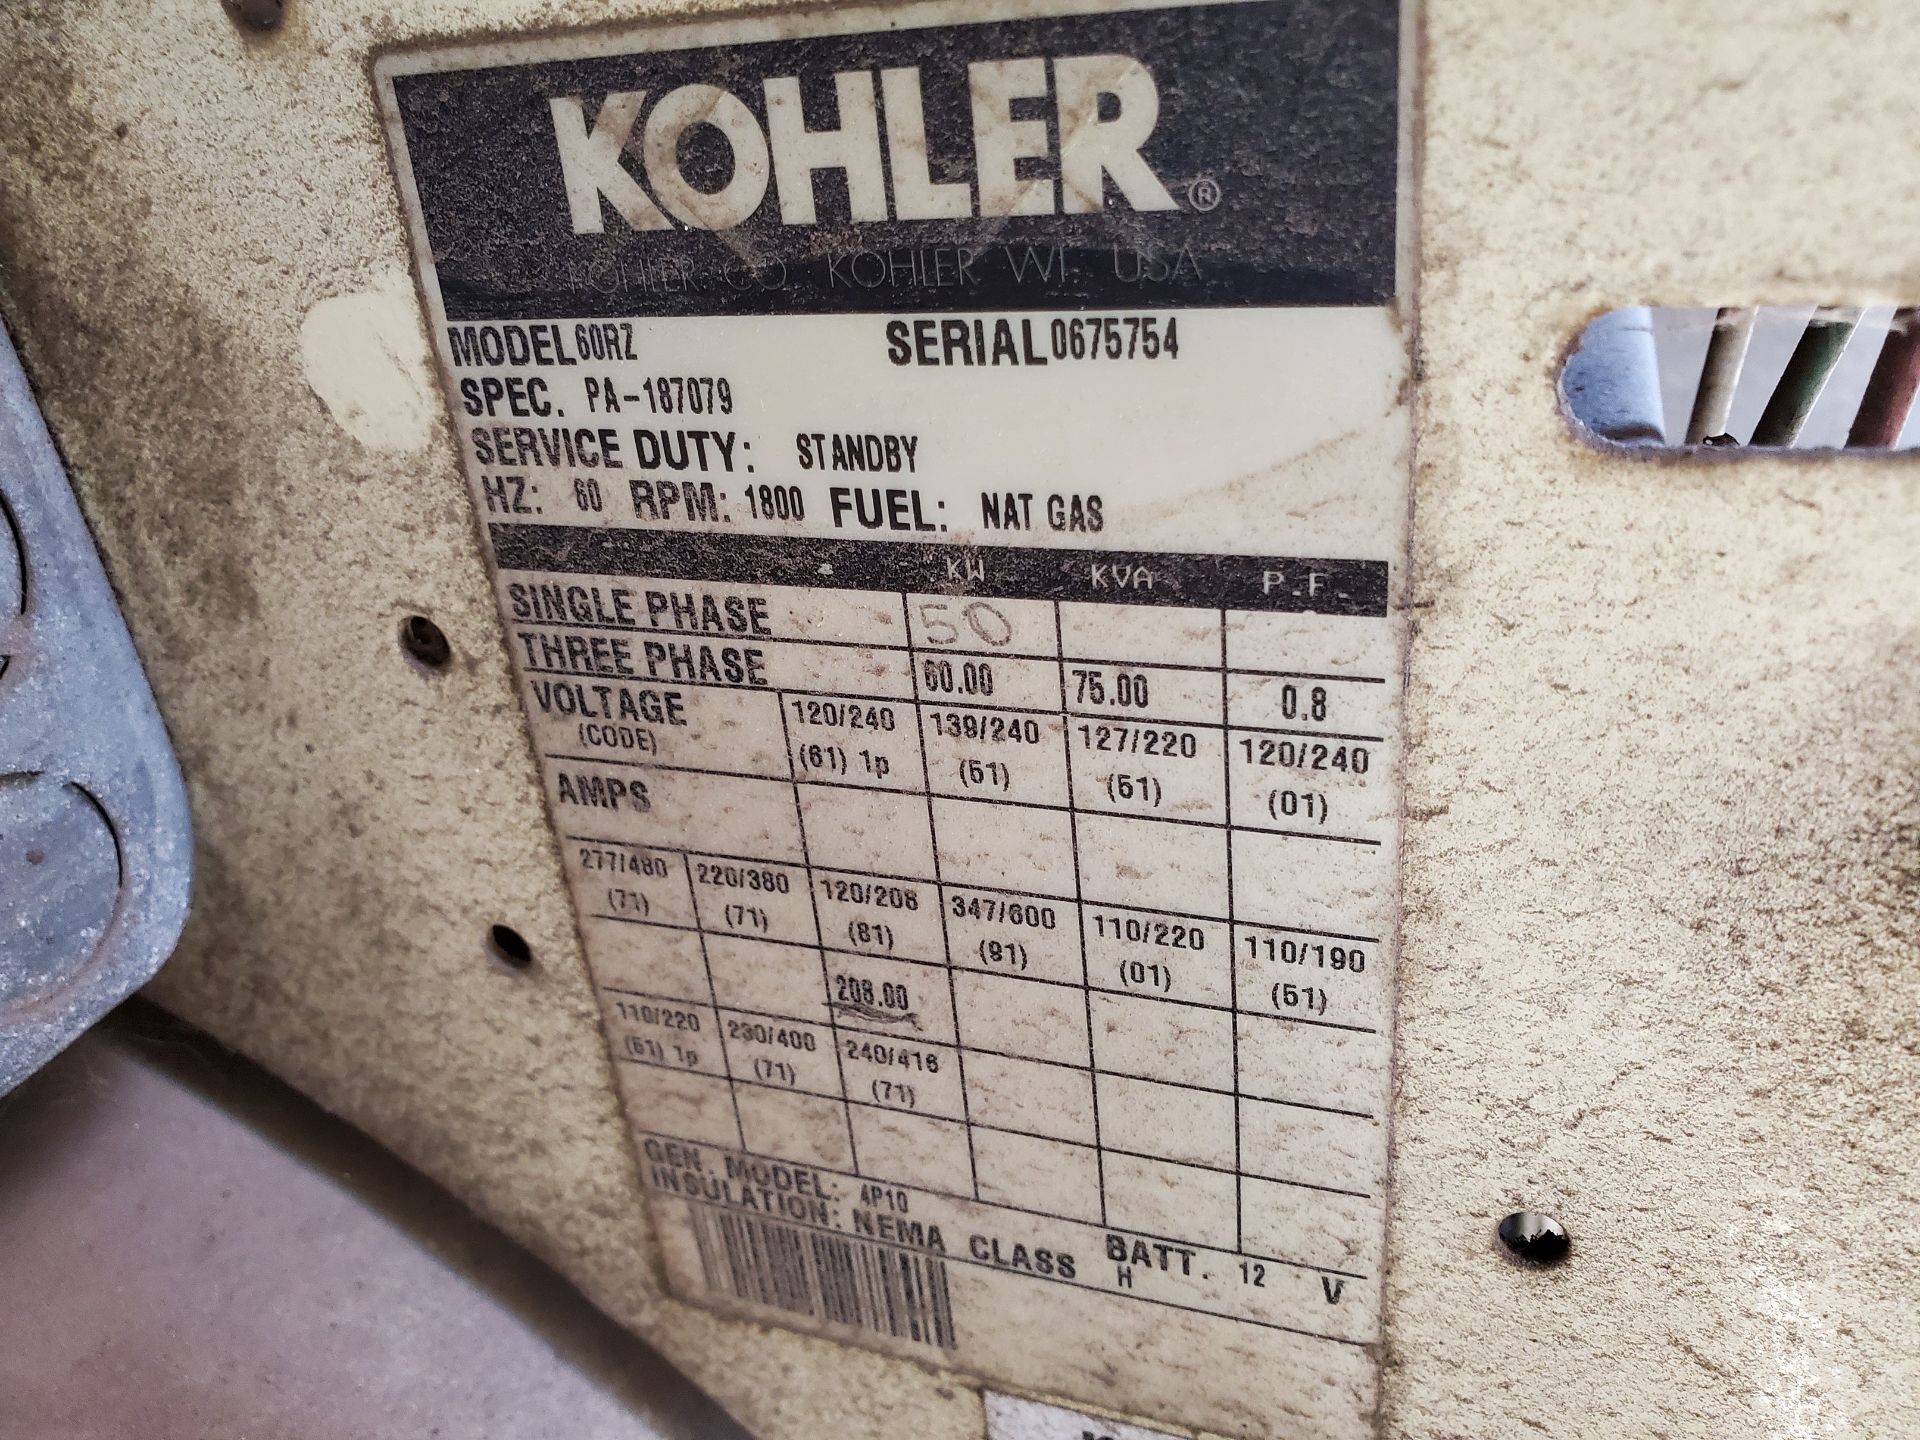 KOHLER NATURAL GAS POWER GENERATOR, MODEL 60RZ, AUTOMATIC 13V OUTPUT BATTERY CHARGER, 2000 YEAR FORD - Image 12 of 14